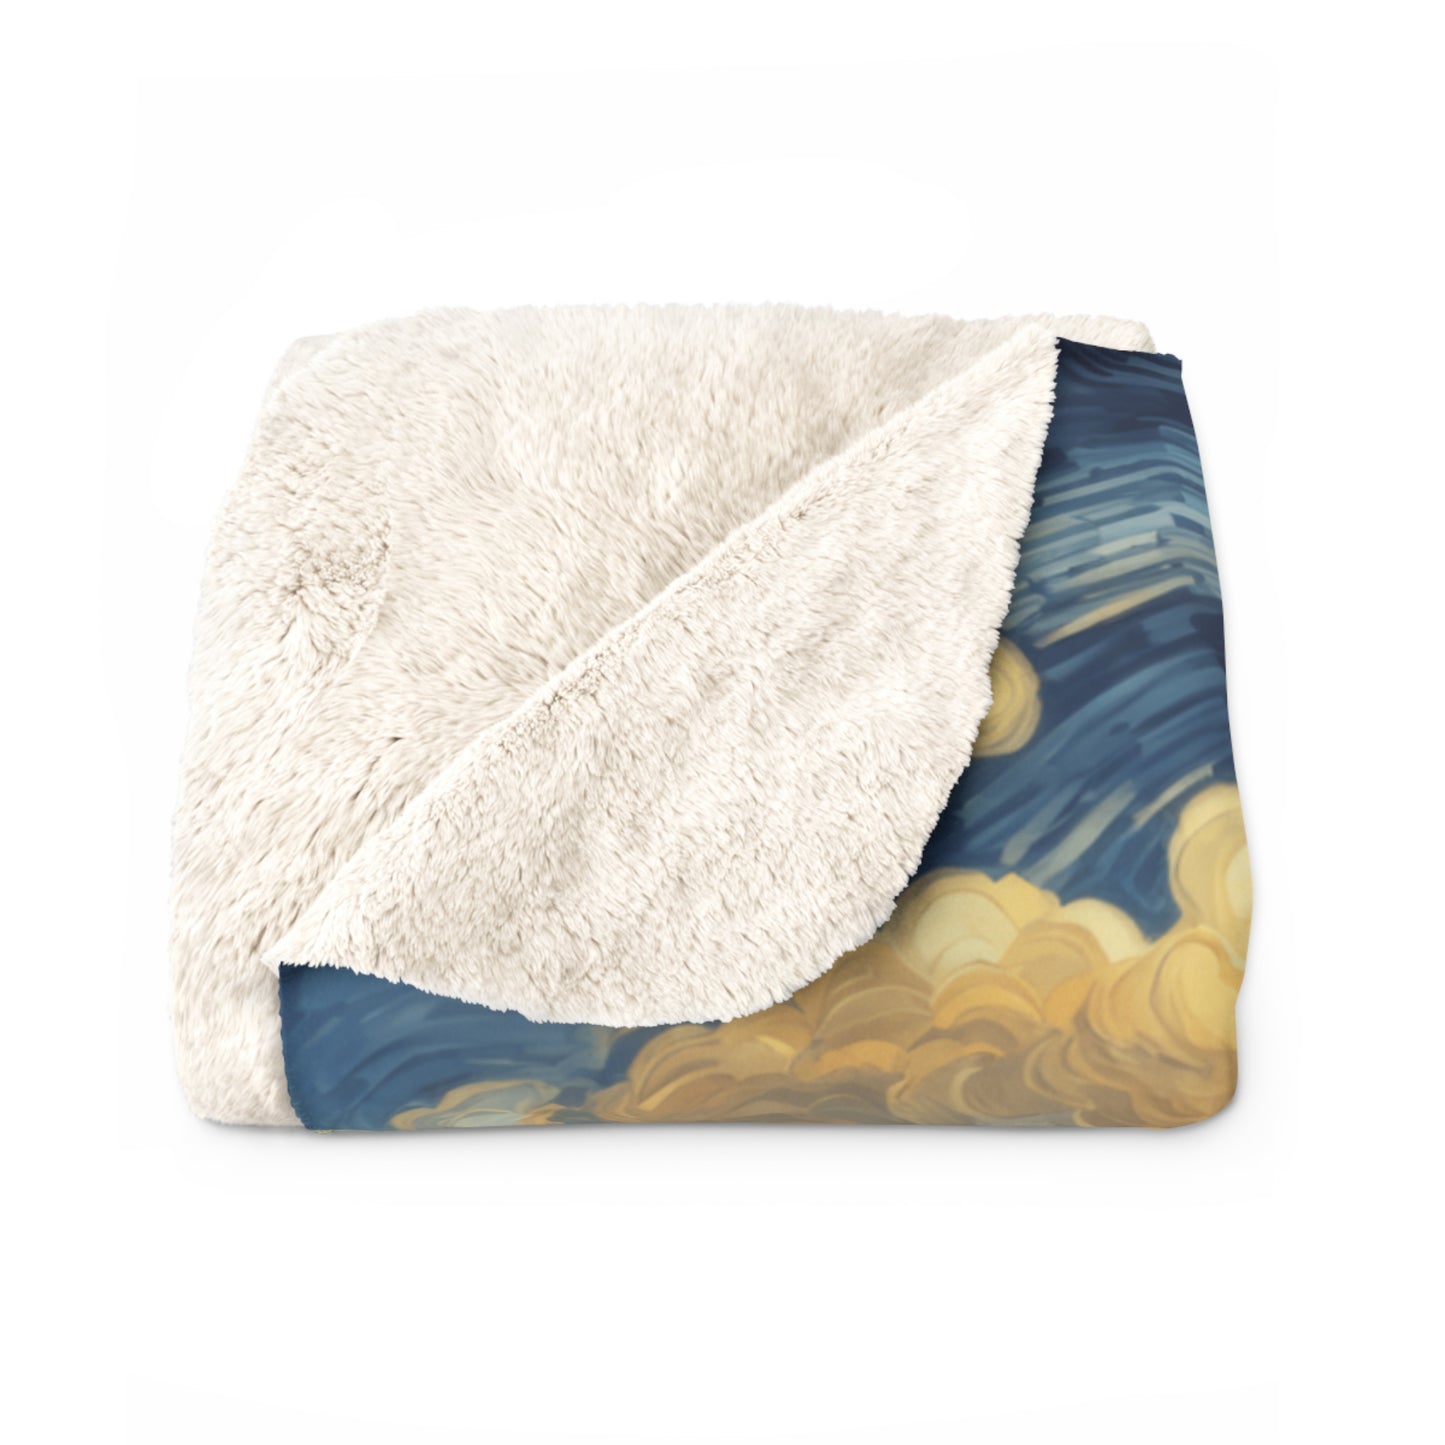 Grand Canyon National Park Sherpa Blanket - The Starry Night